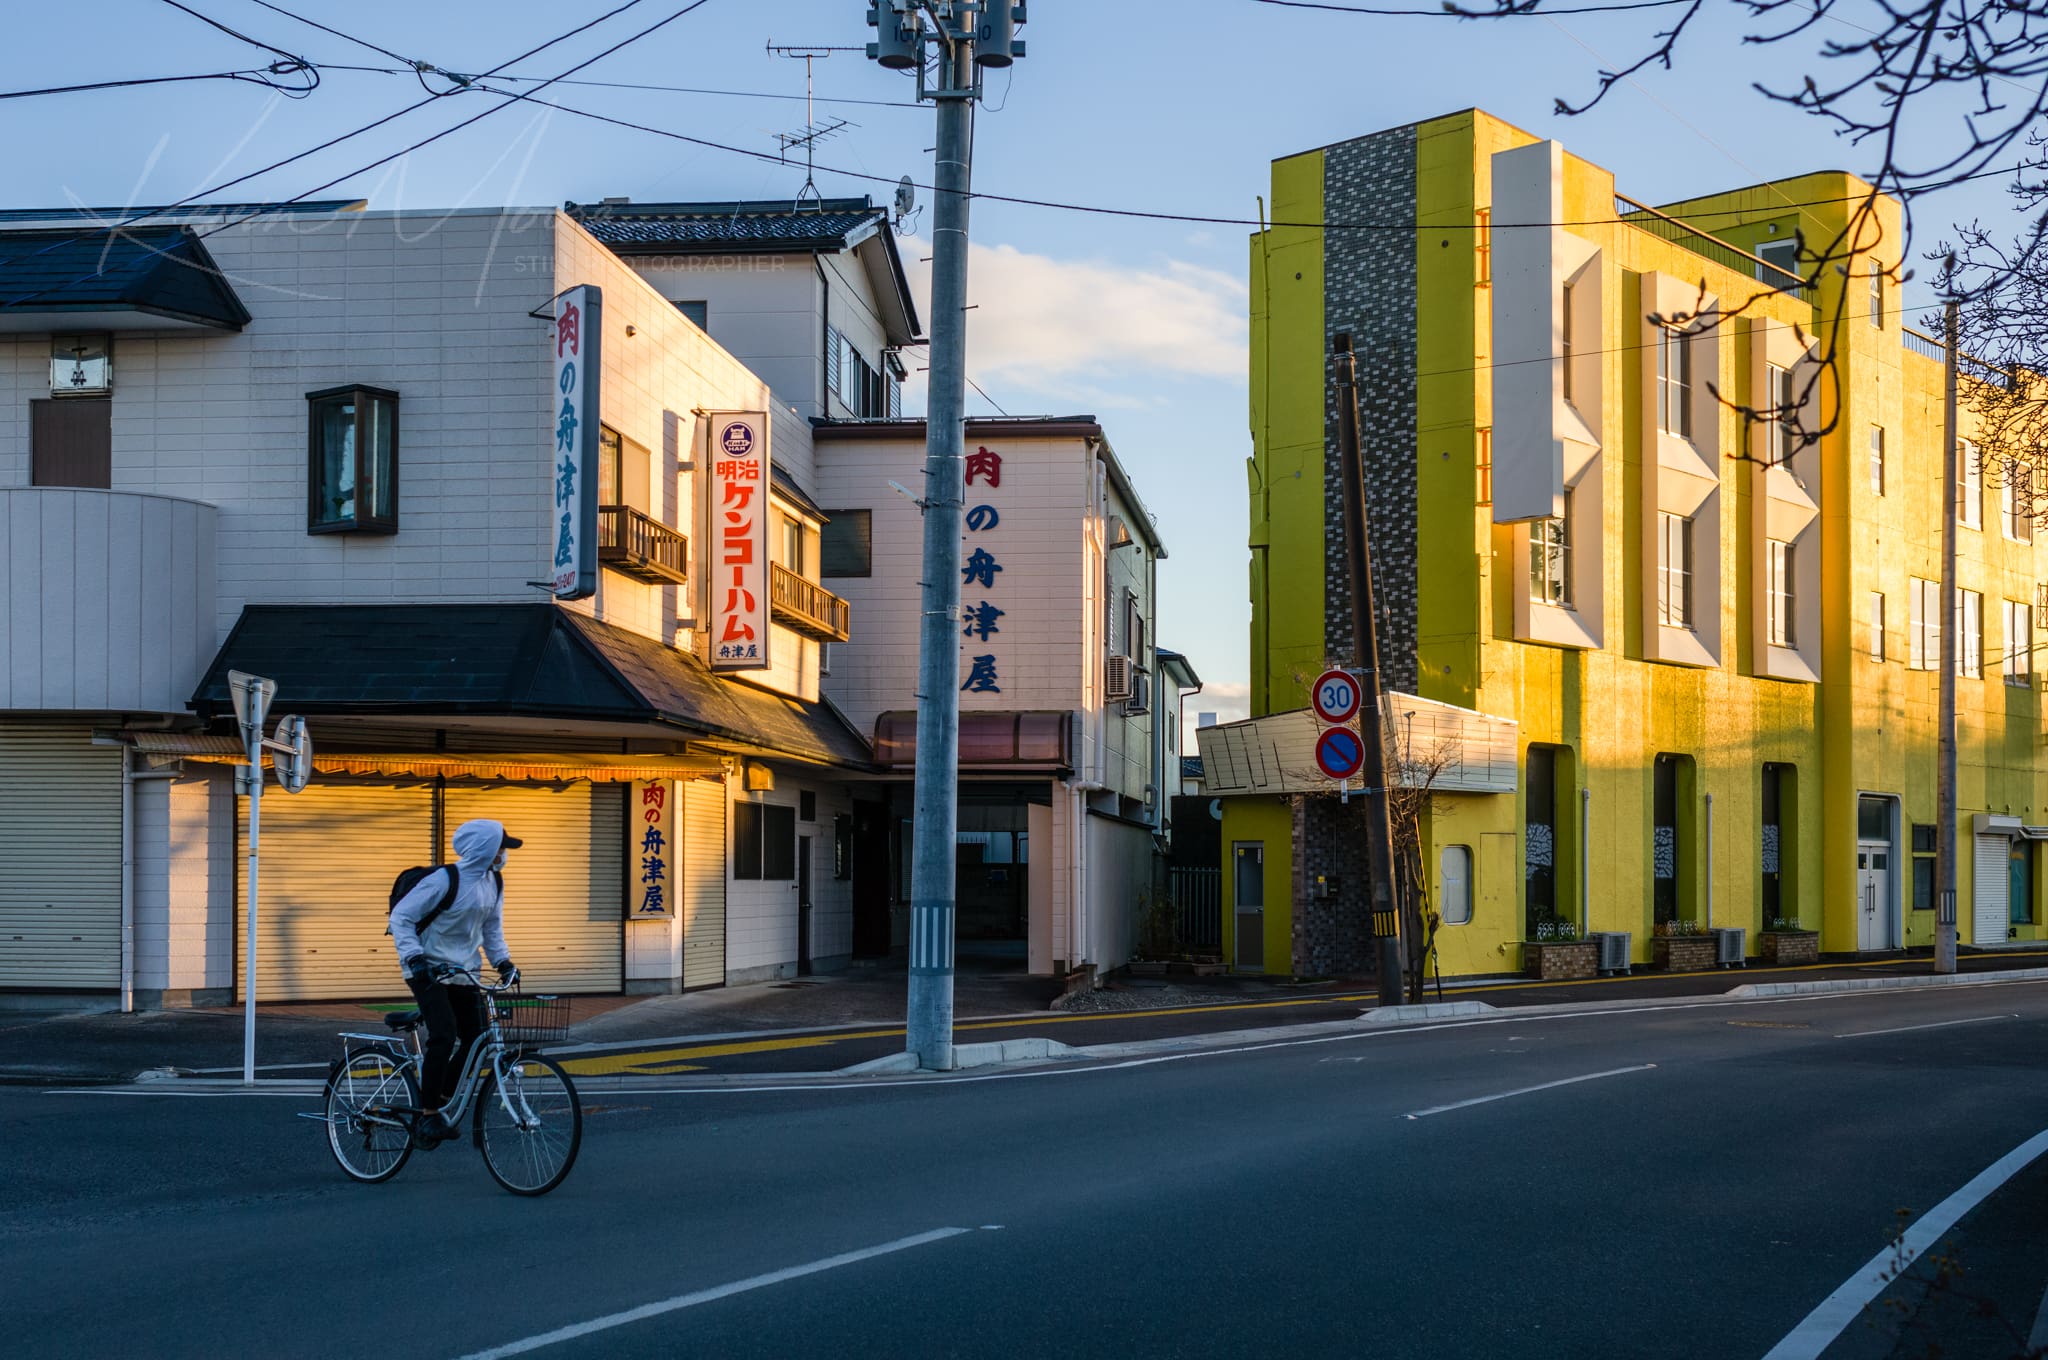 Japanese urban street with a traditional and modern building during golden hour.